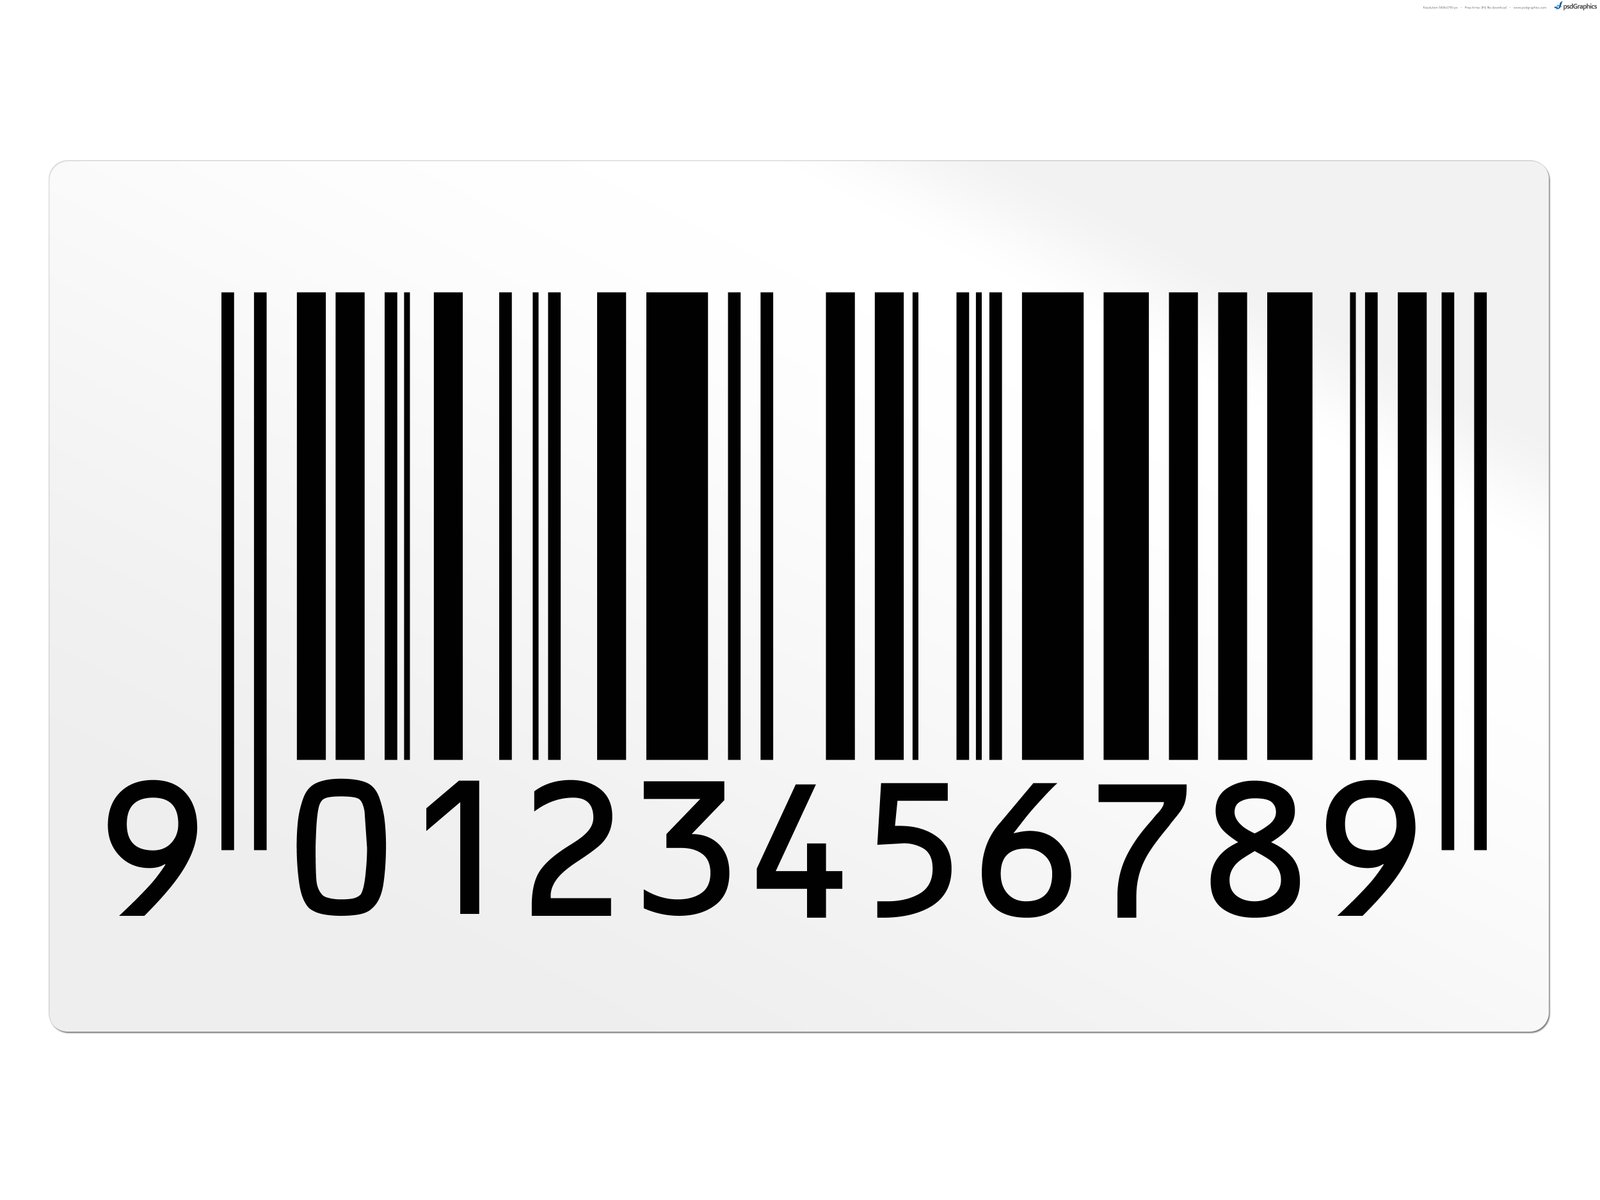 barcode free download